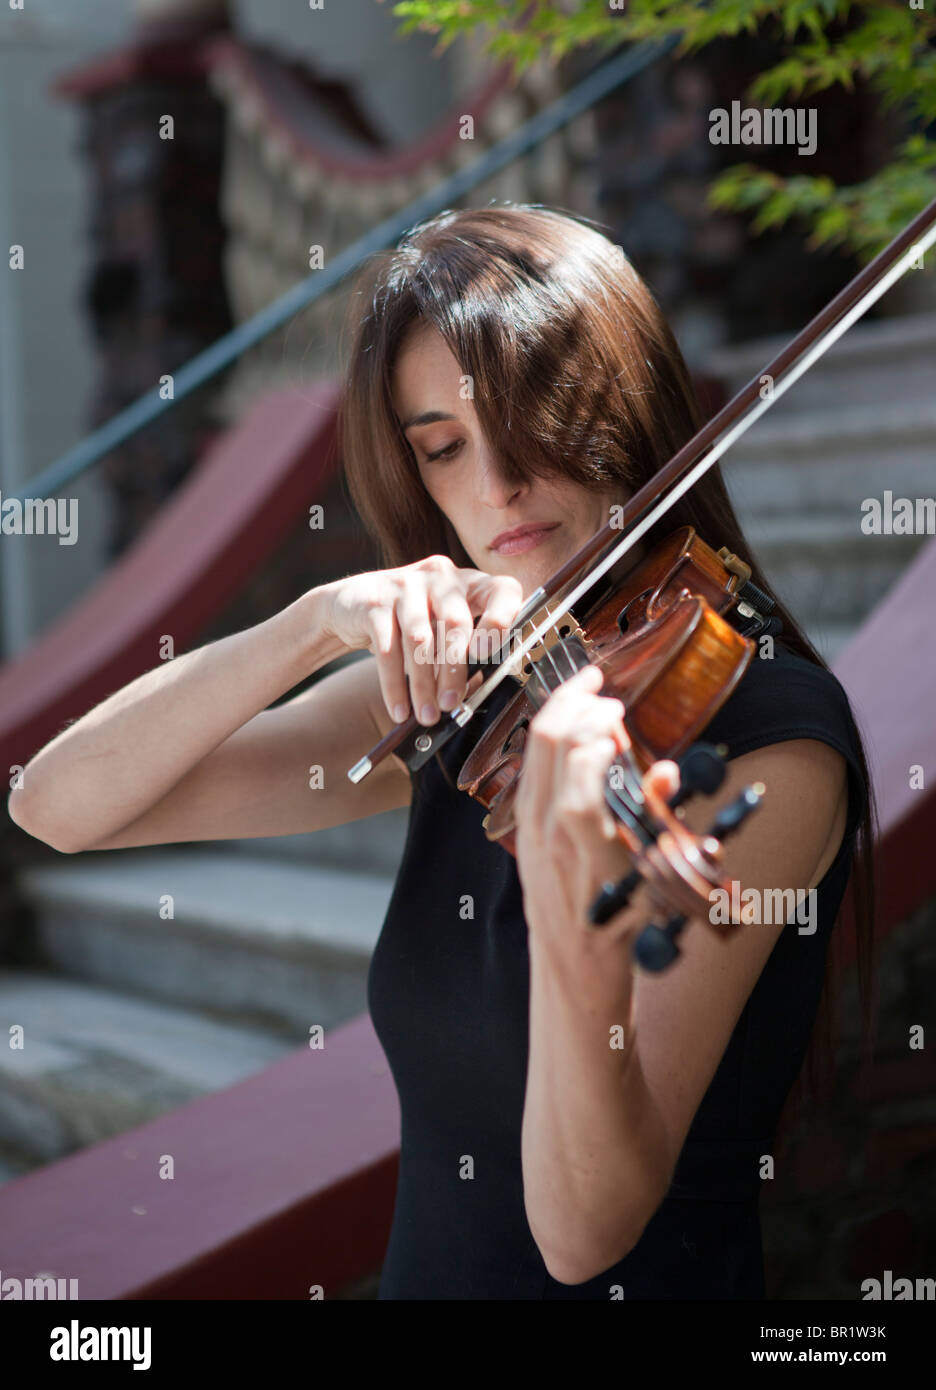 A female violinist playing outdoors, outside a building Stock Photo